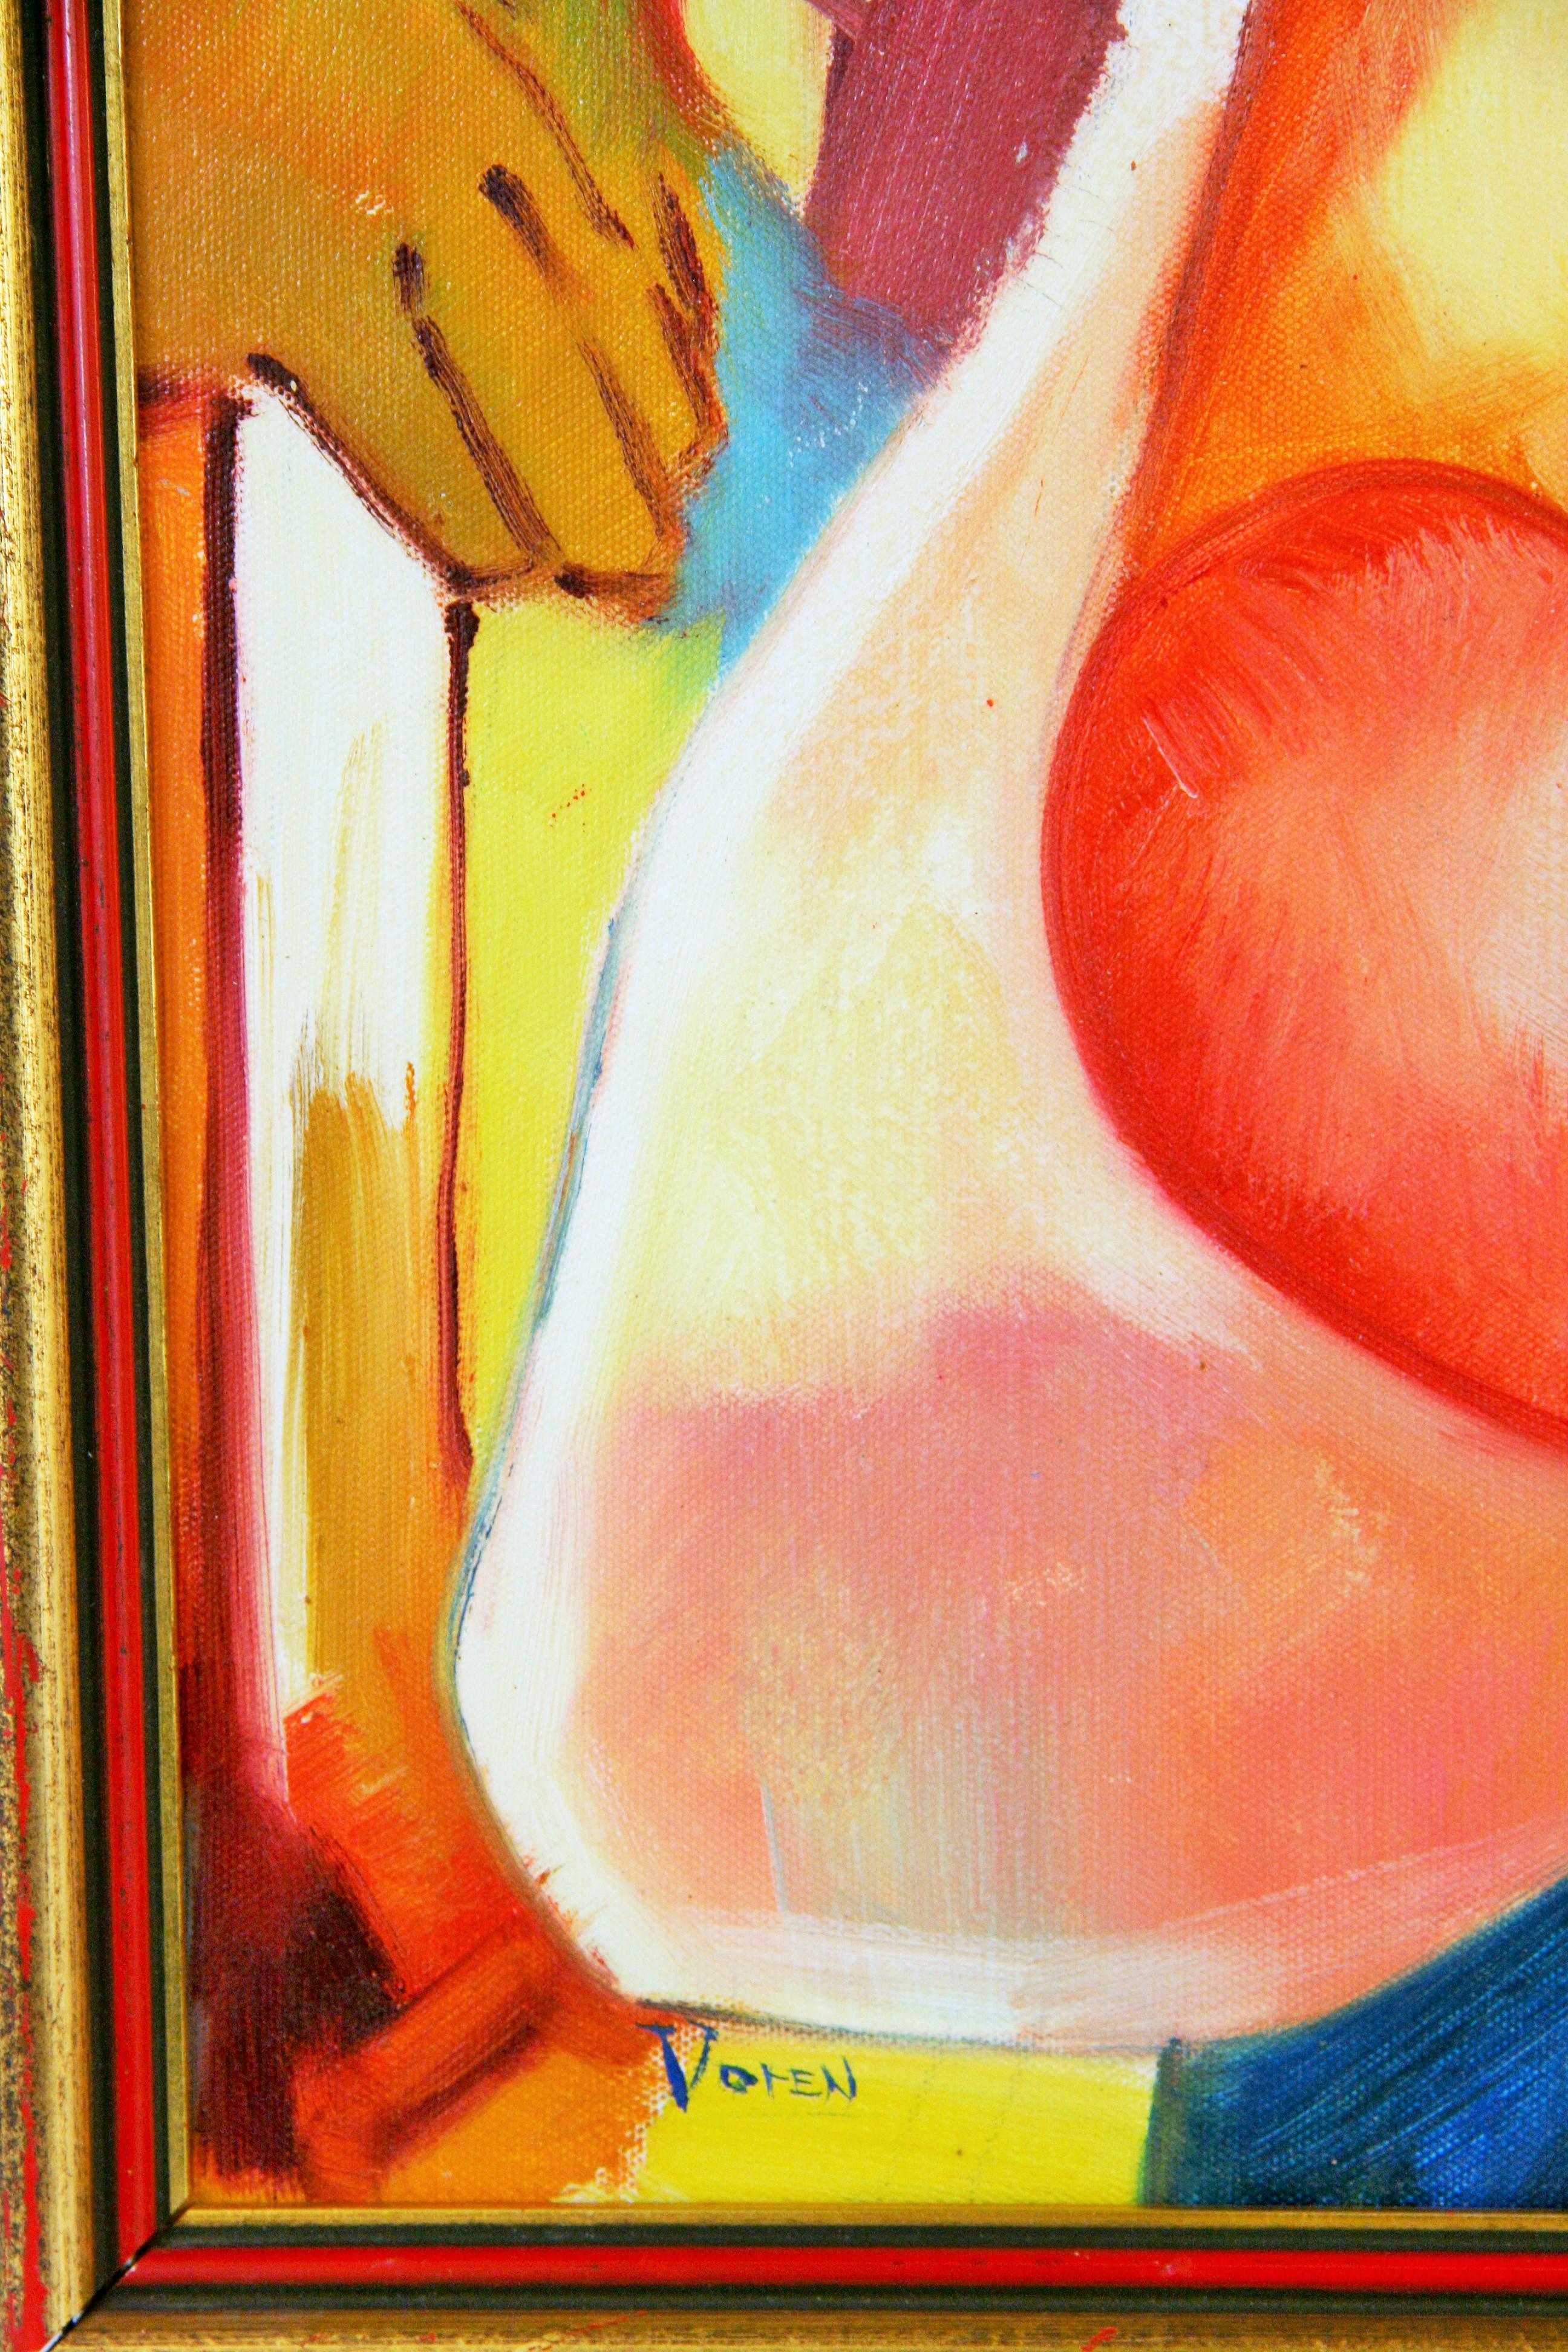  Heart on Fire Female Figurative Abstract Painting 1